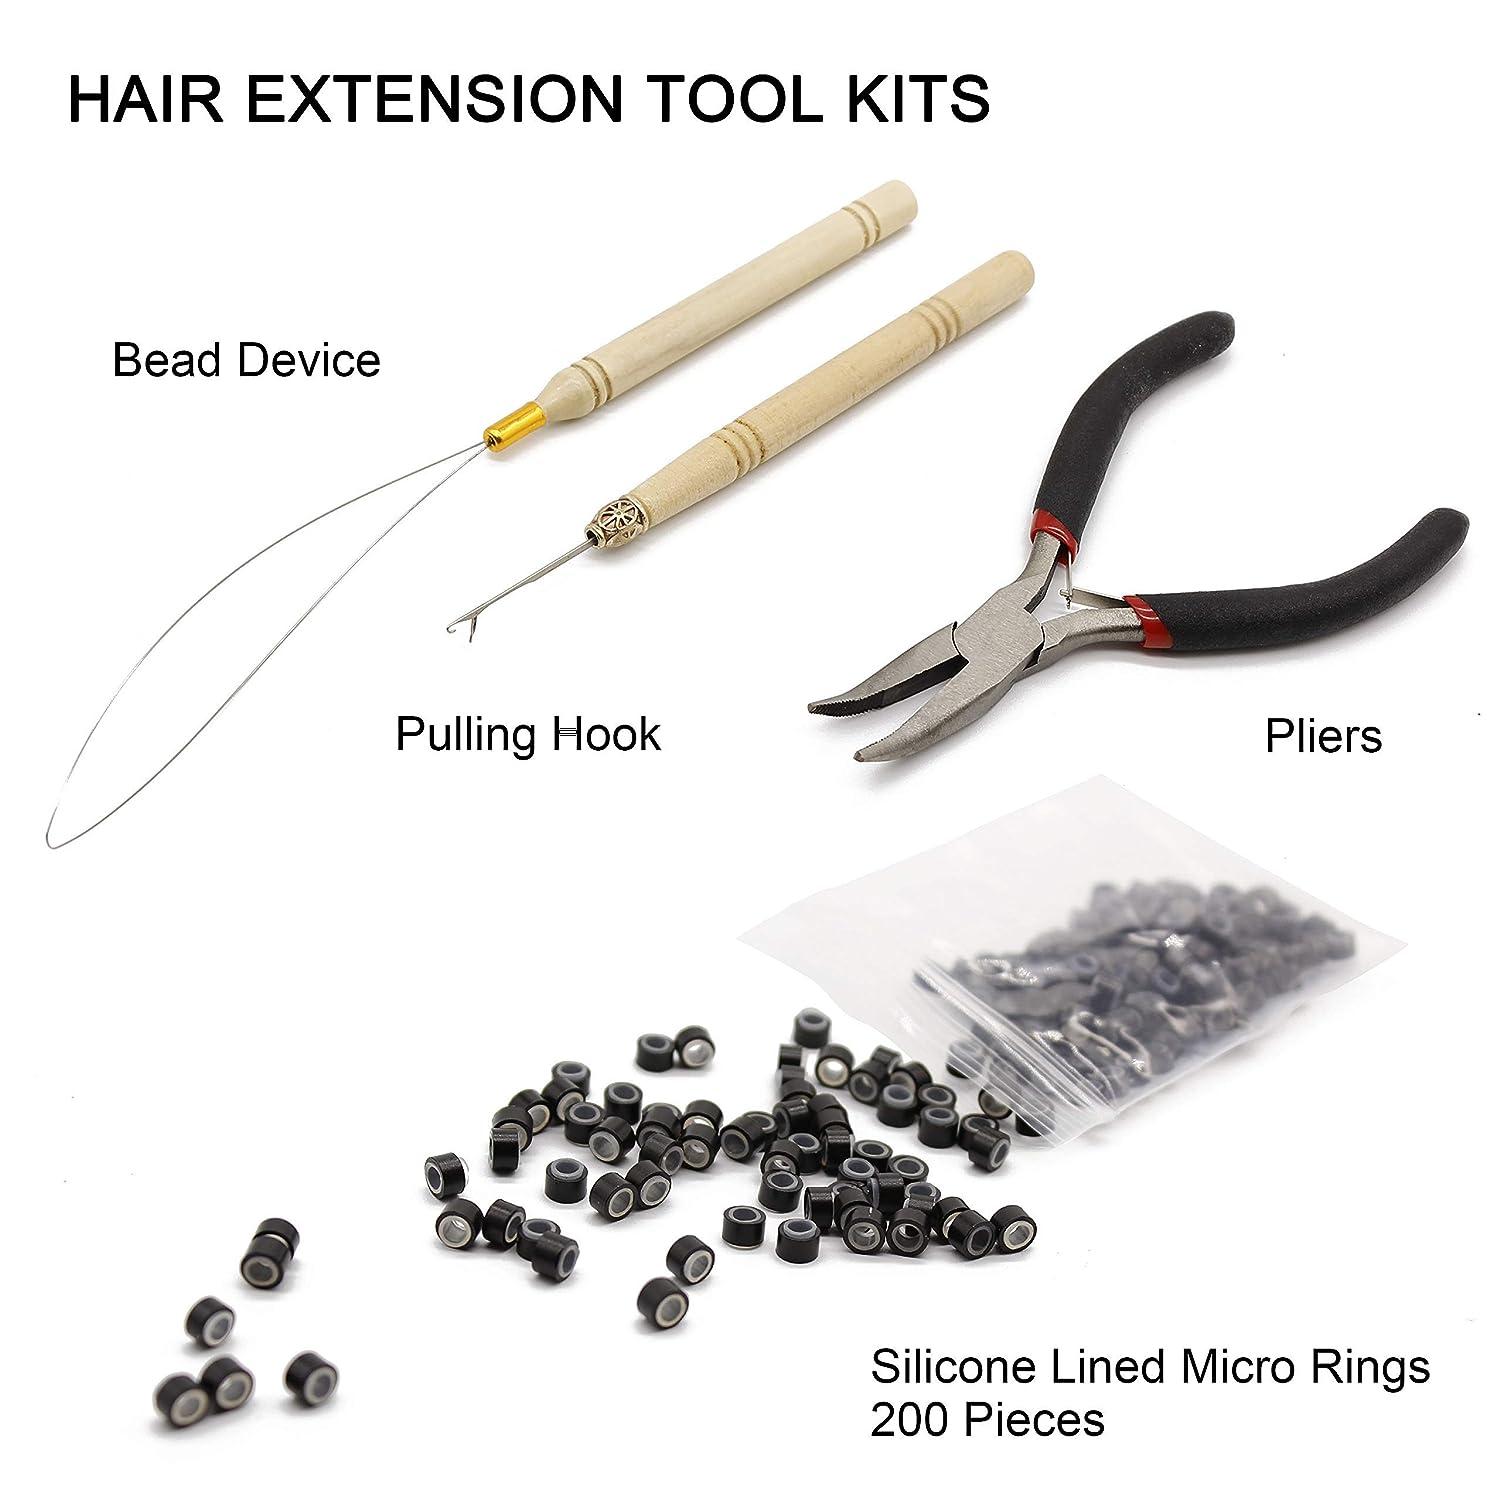 Hair Extension Tools Kit, Bead Device Tool, 1pc Curved Tip Hair